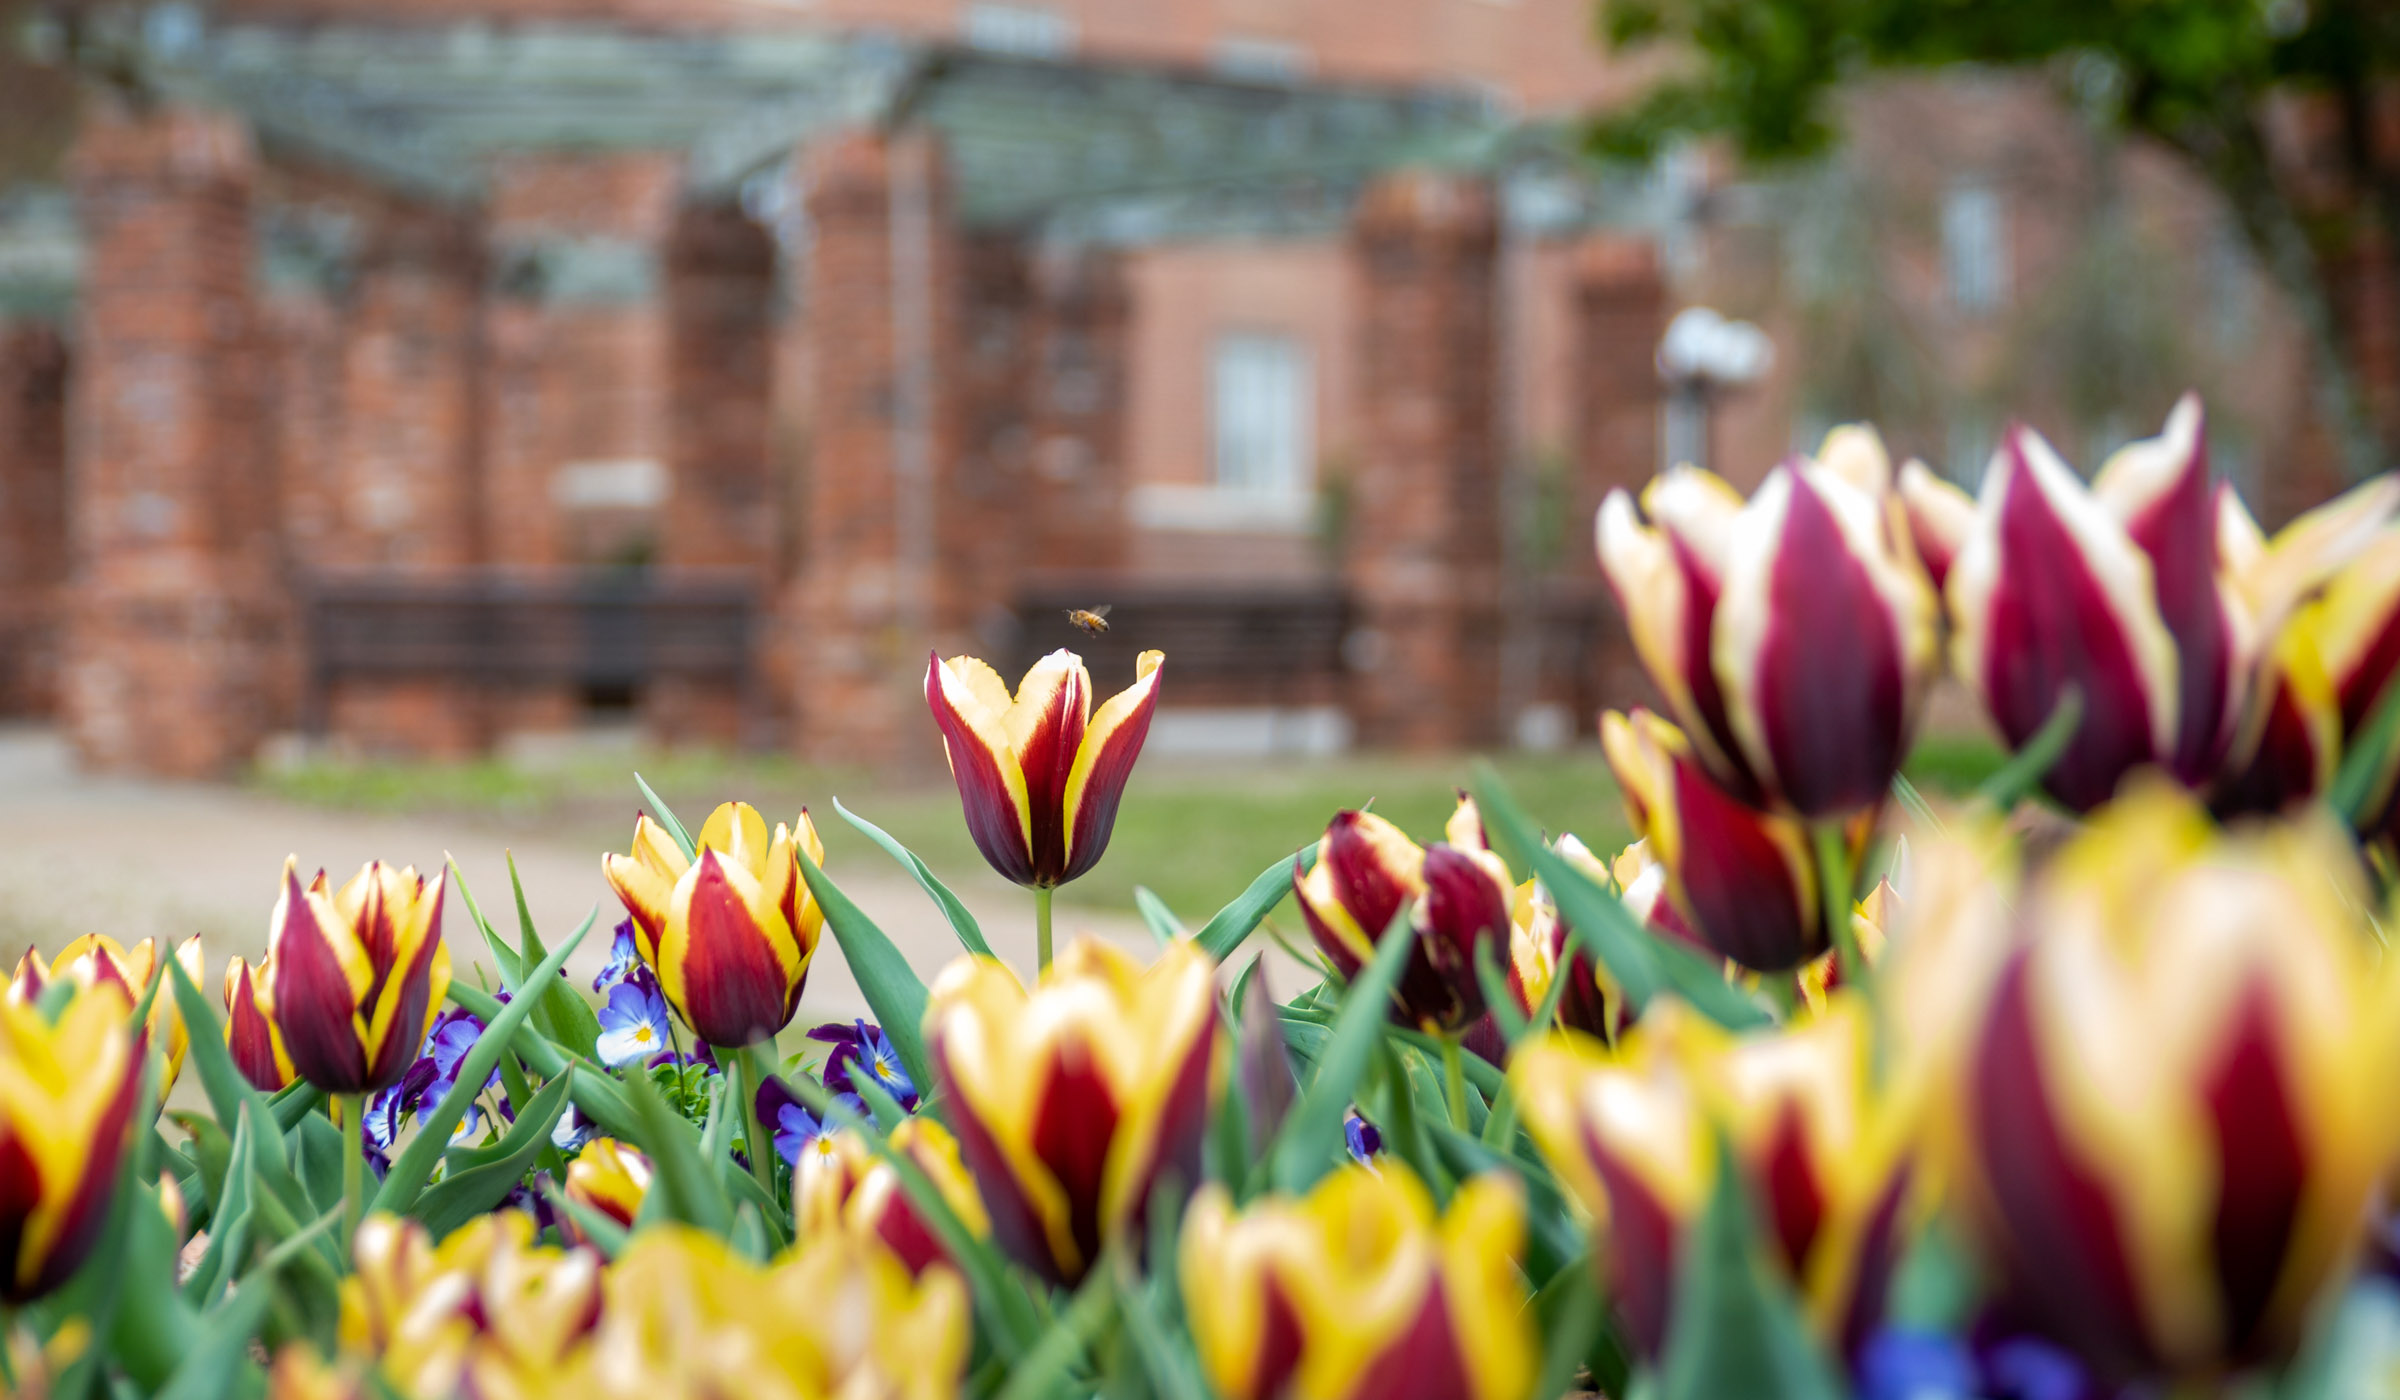 A bee visits one of a group of tulips with a maroon and yellow flame pattern, with the Chapel trellis blurry in in the background.